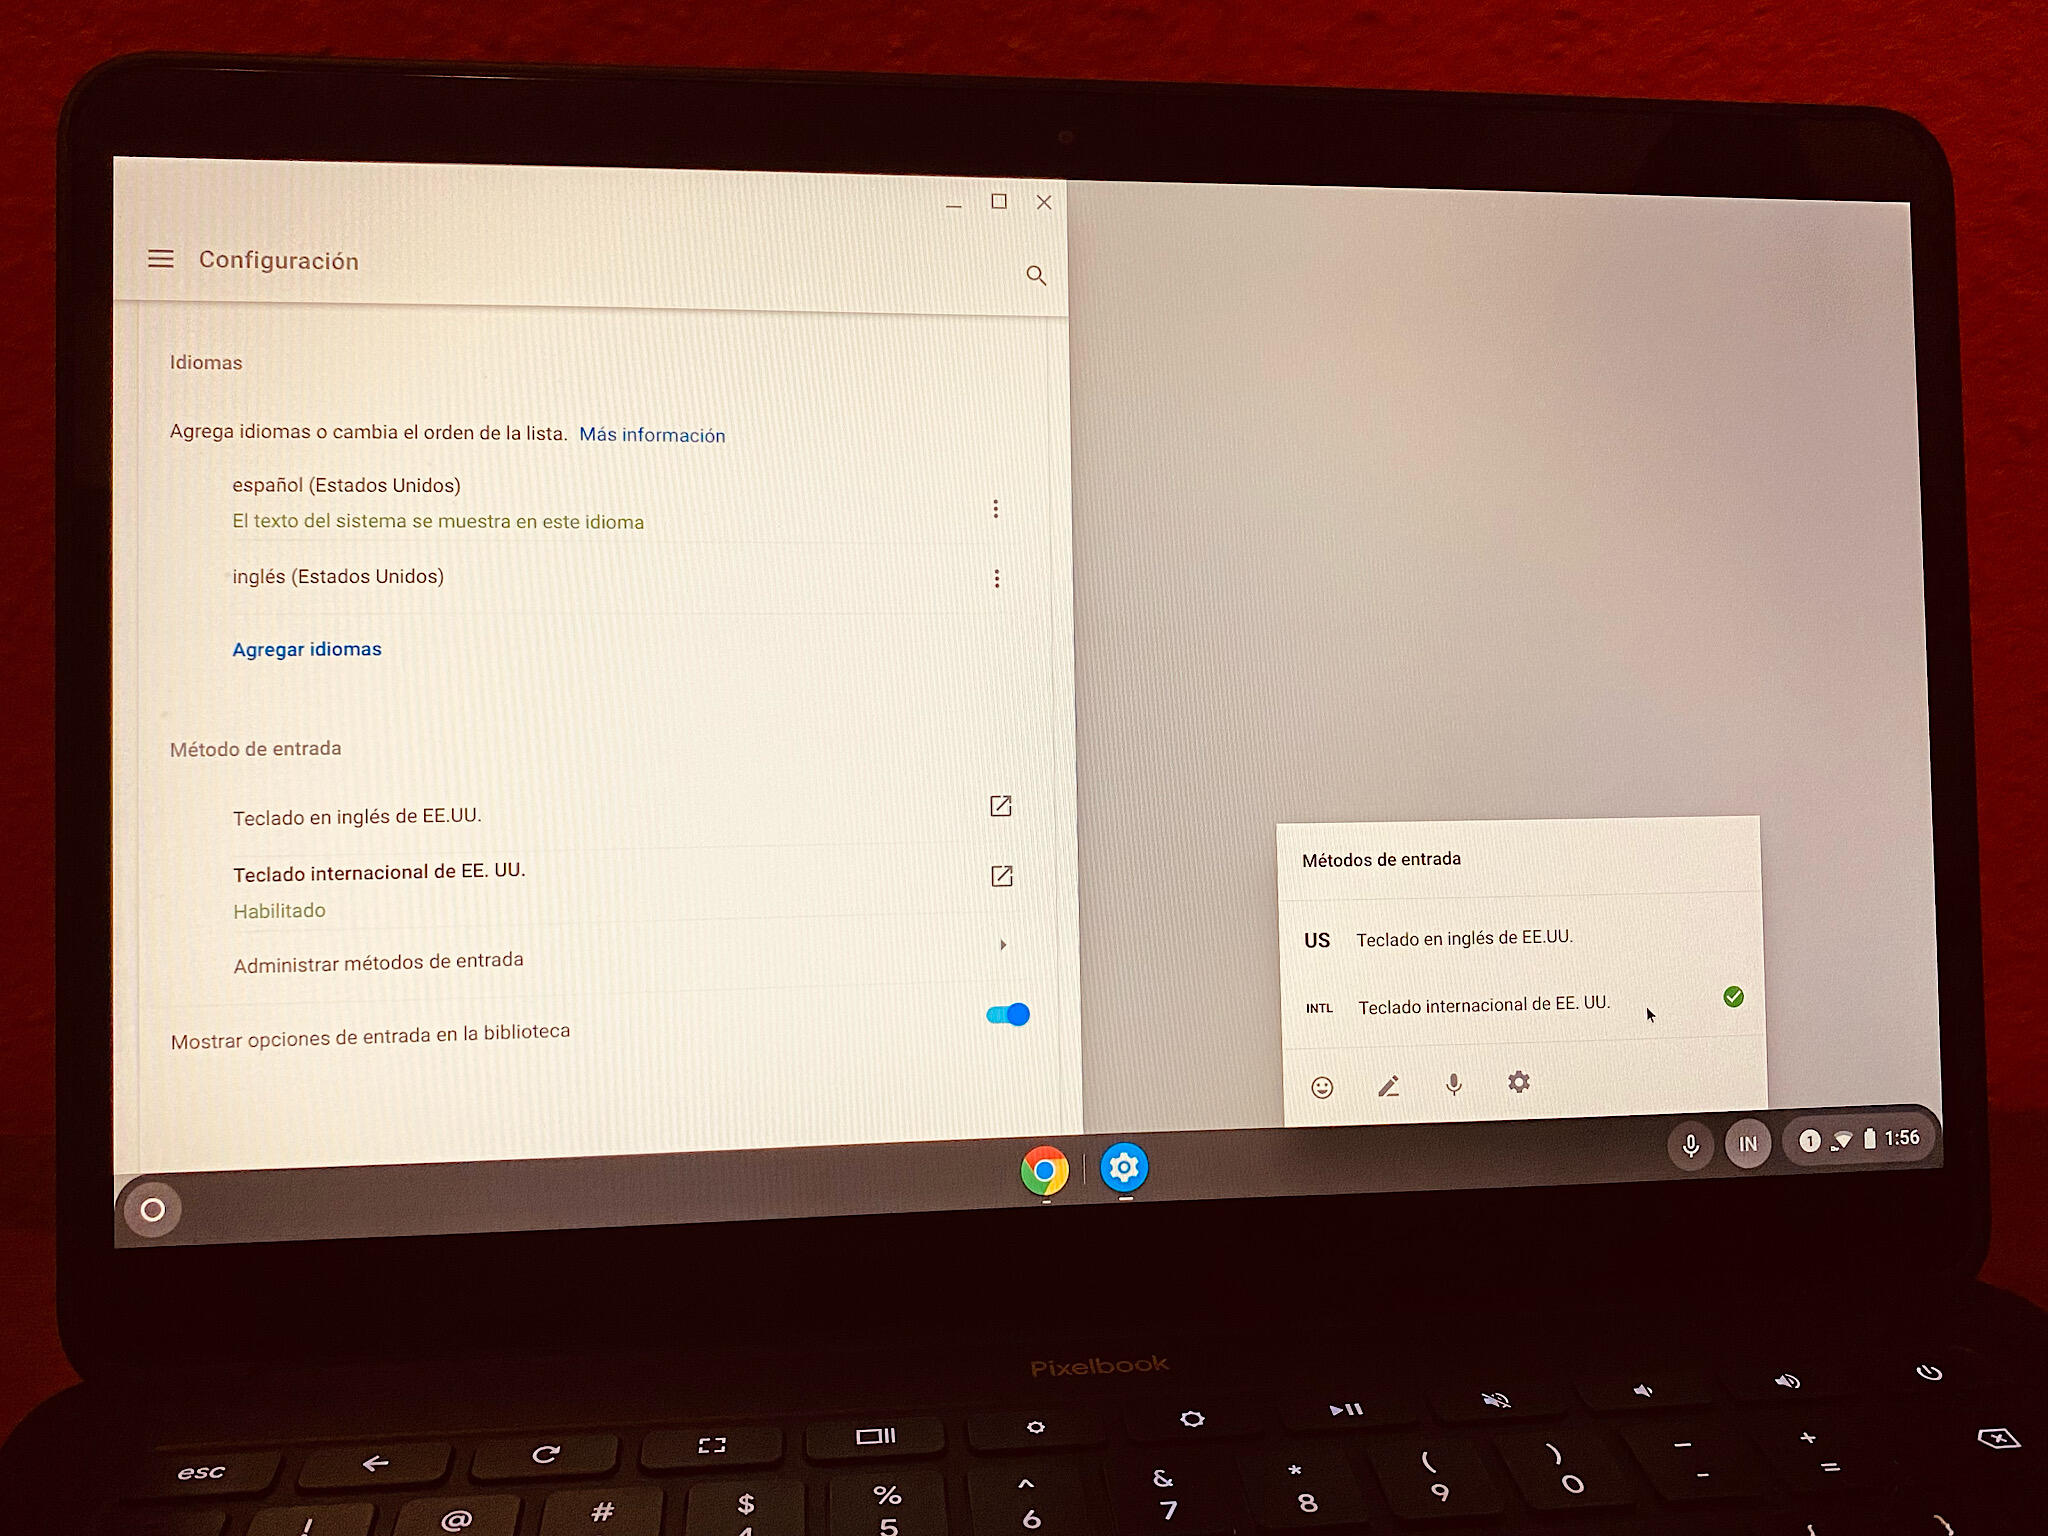 How to configure a Chromebook for Spanish and English - TechRepublic